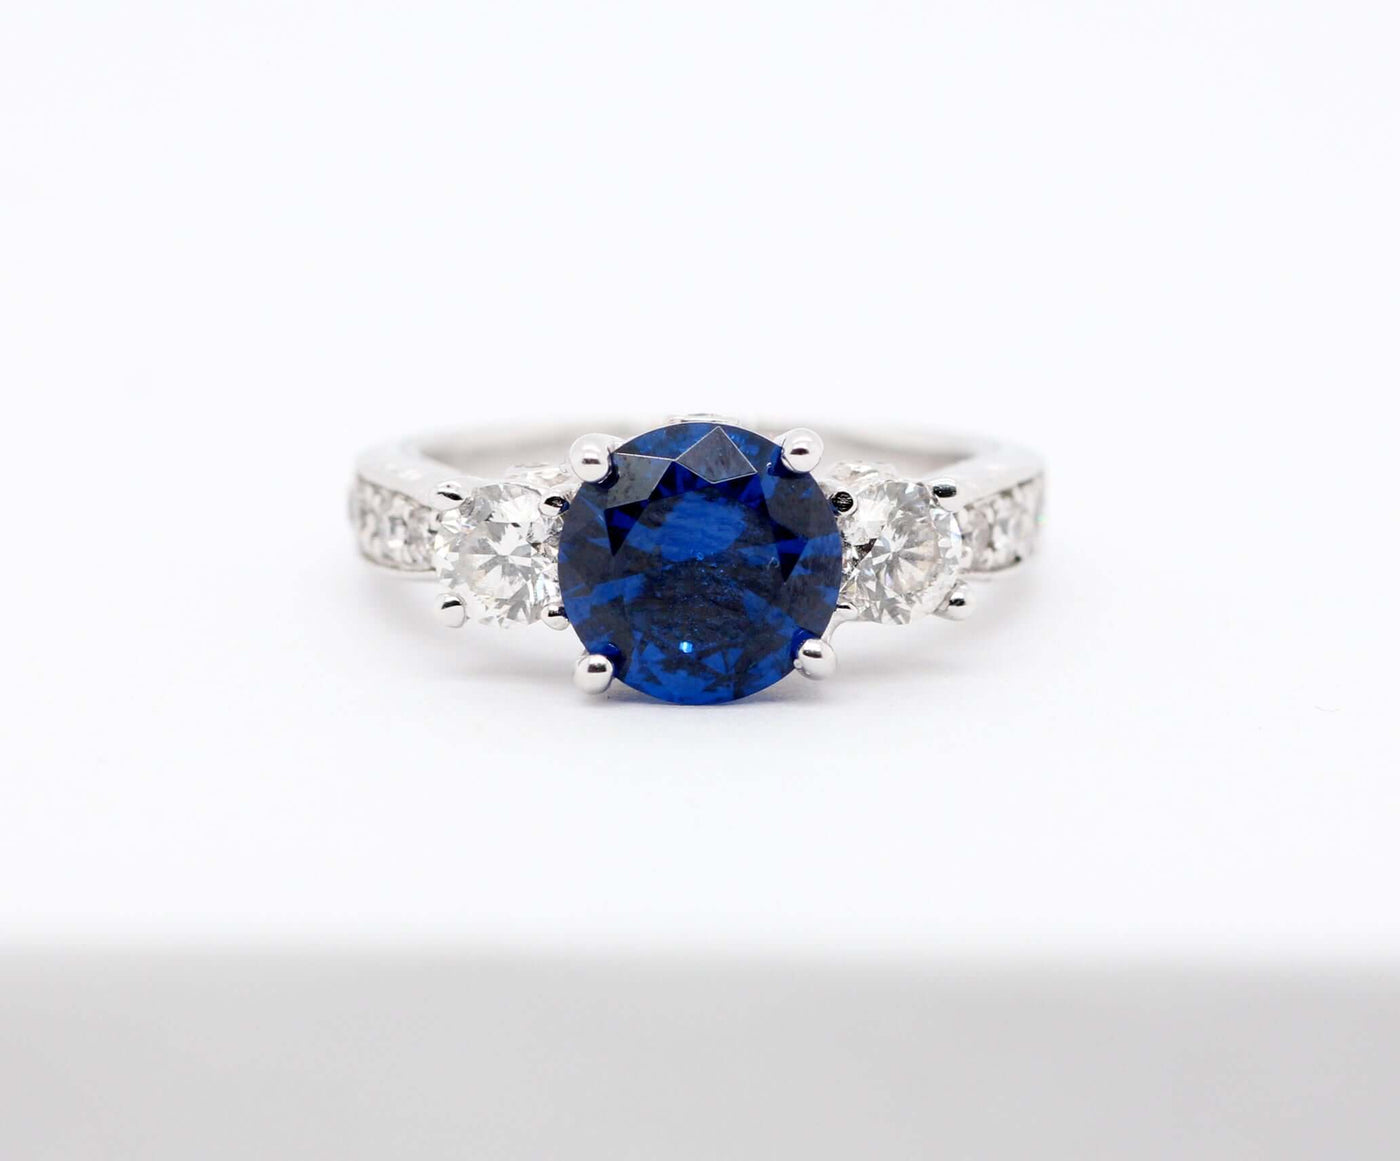 18KW 2.21 CT BLUE SPINEL AND DIAMOND RING .74 CTTW H-SI1